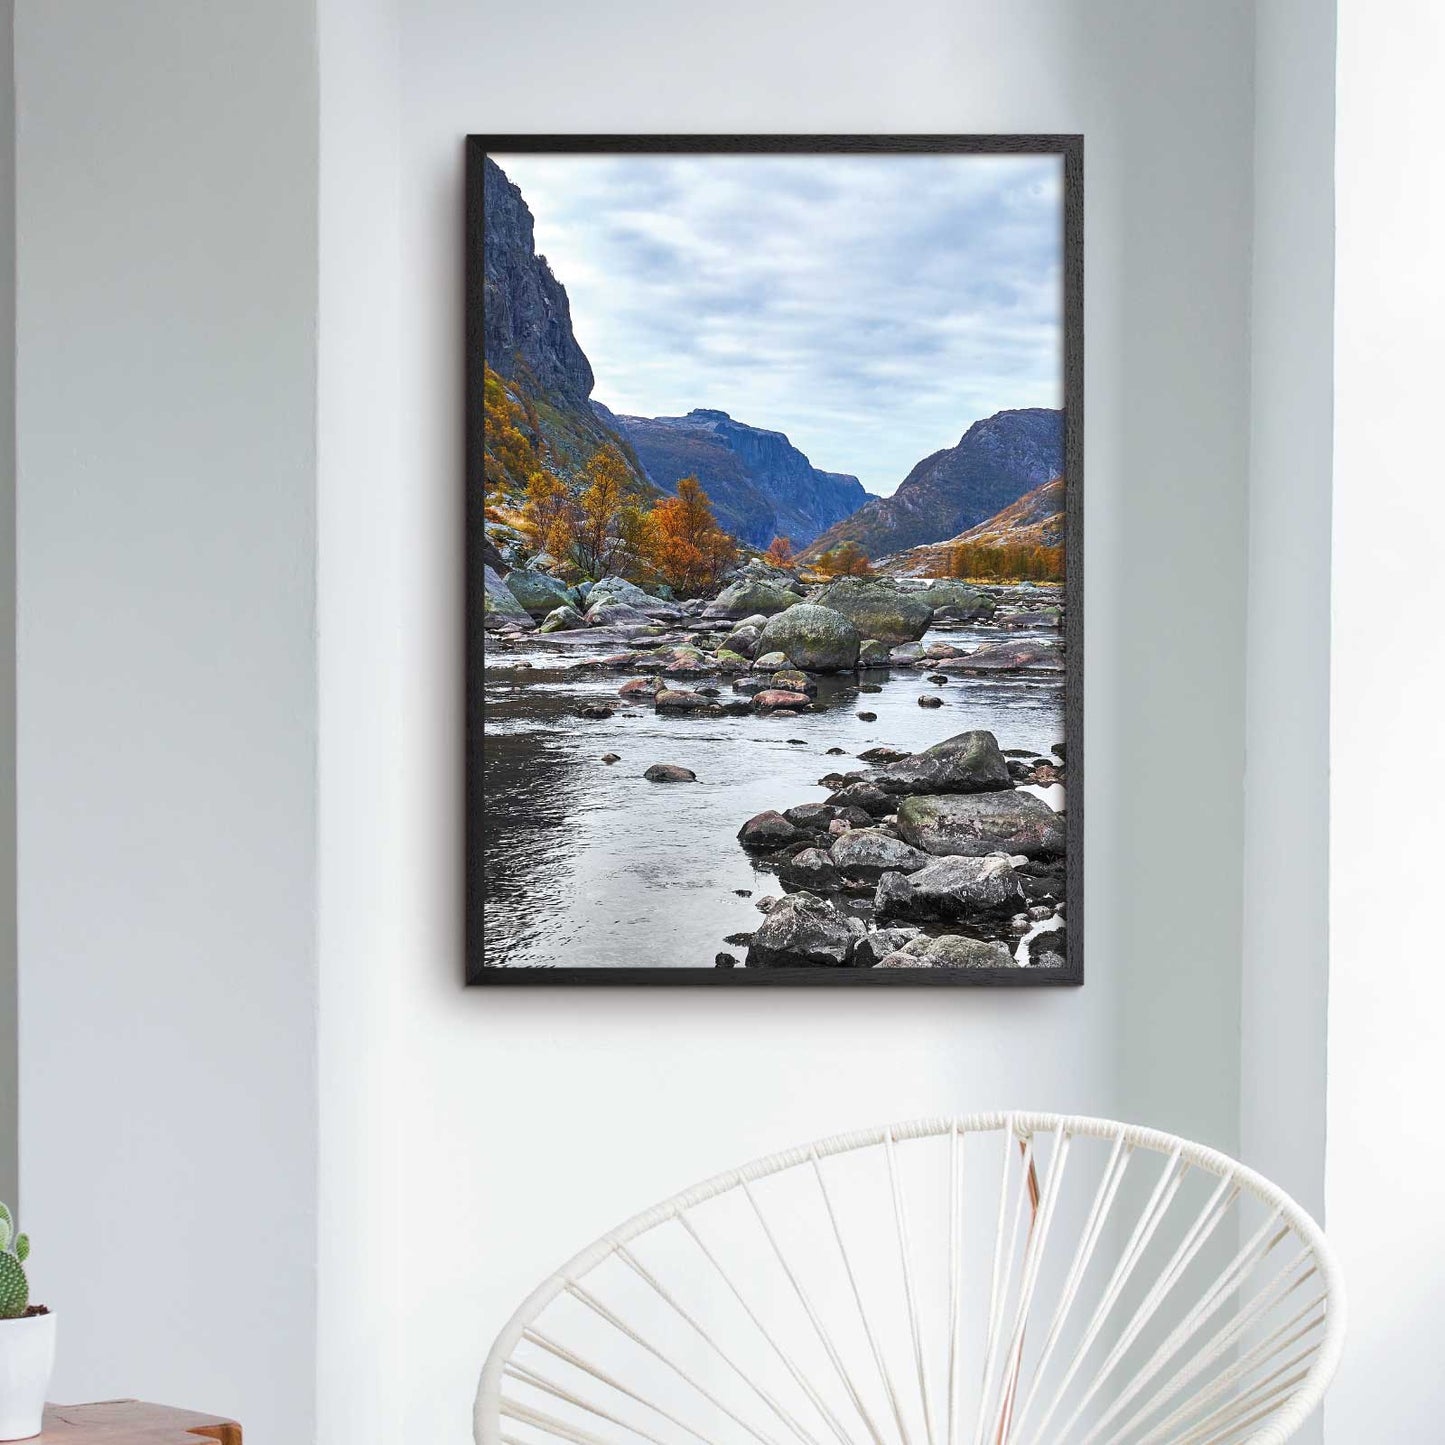 Norway autumn poster with a river running between mountains